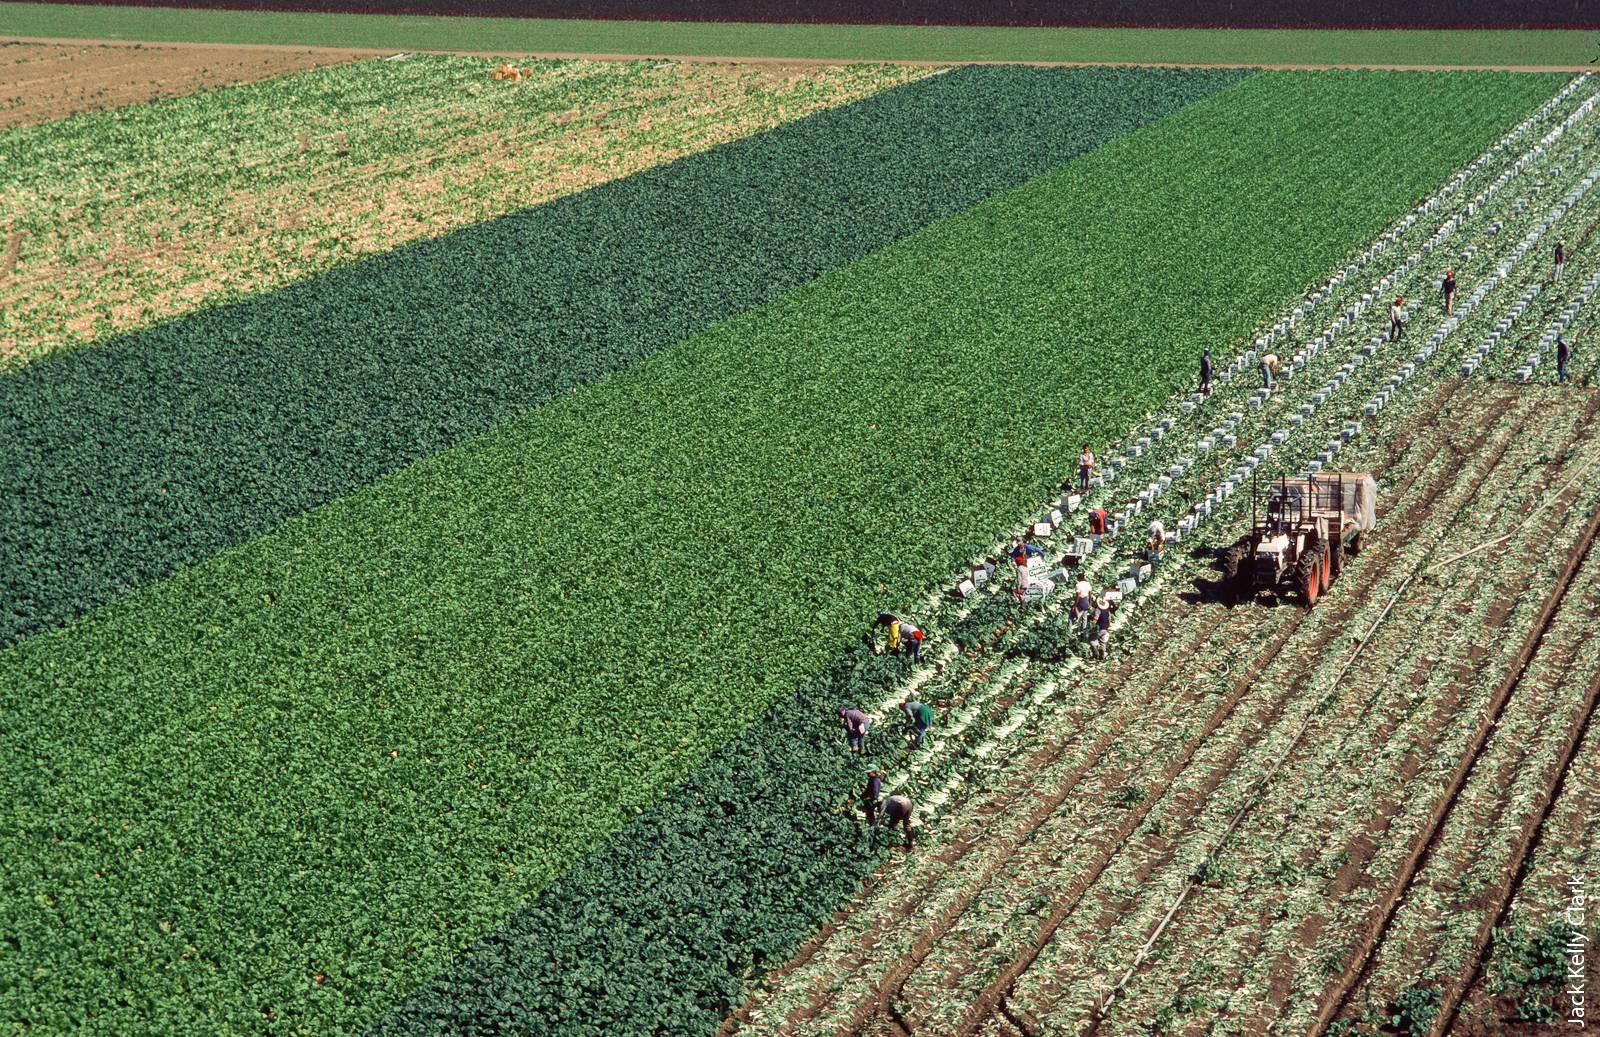 Employment data show that most California farmworkers have only one farm employer, which suggests that the state has a stable agricultural workforce.